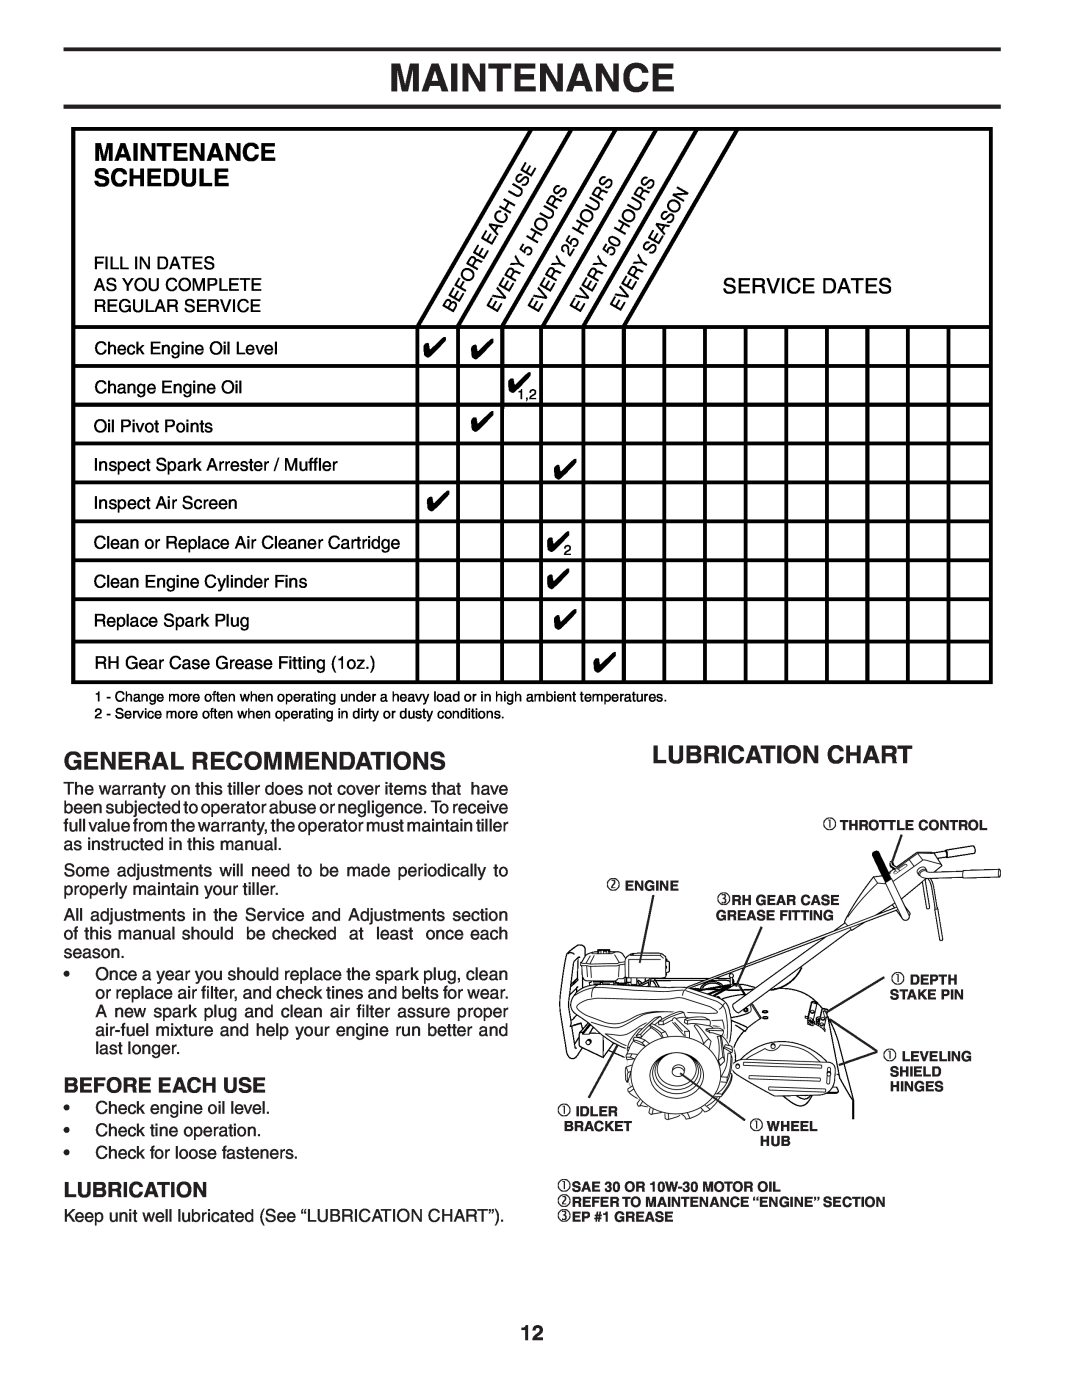 Poulan 401423 manual Maintenance, Schedule, General Recommendations, Lubrication Chart, Before Each Use, Service Dates 